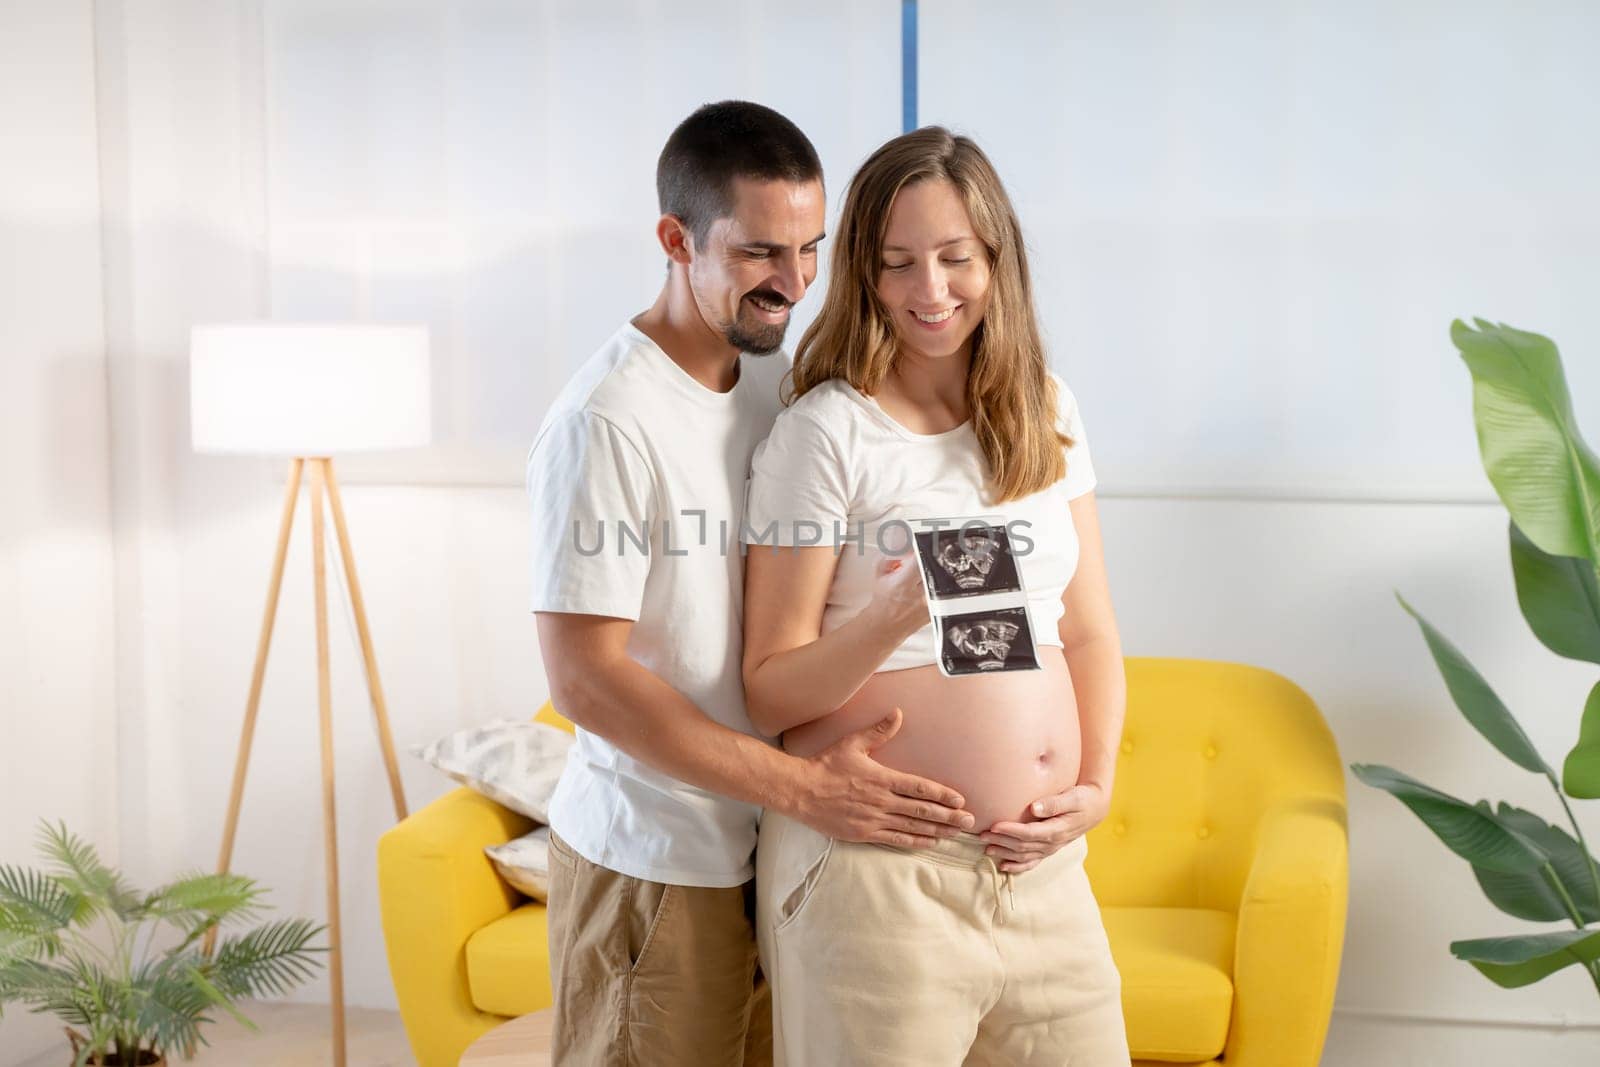 Pregnancy couple hugging looking picture of ultrasound, smiling happily touching belly. High quality photo